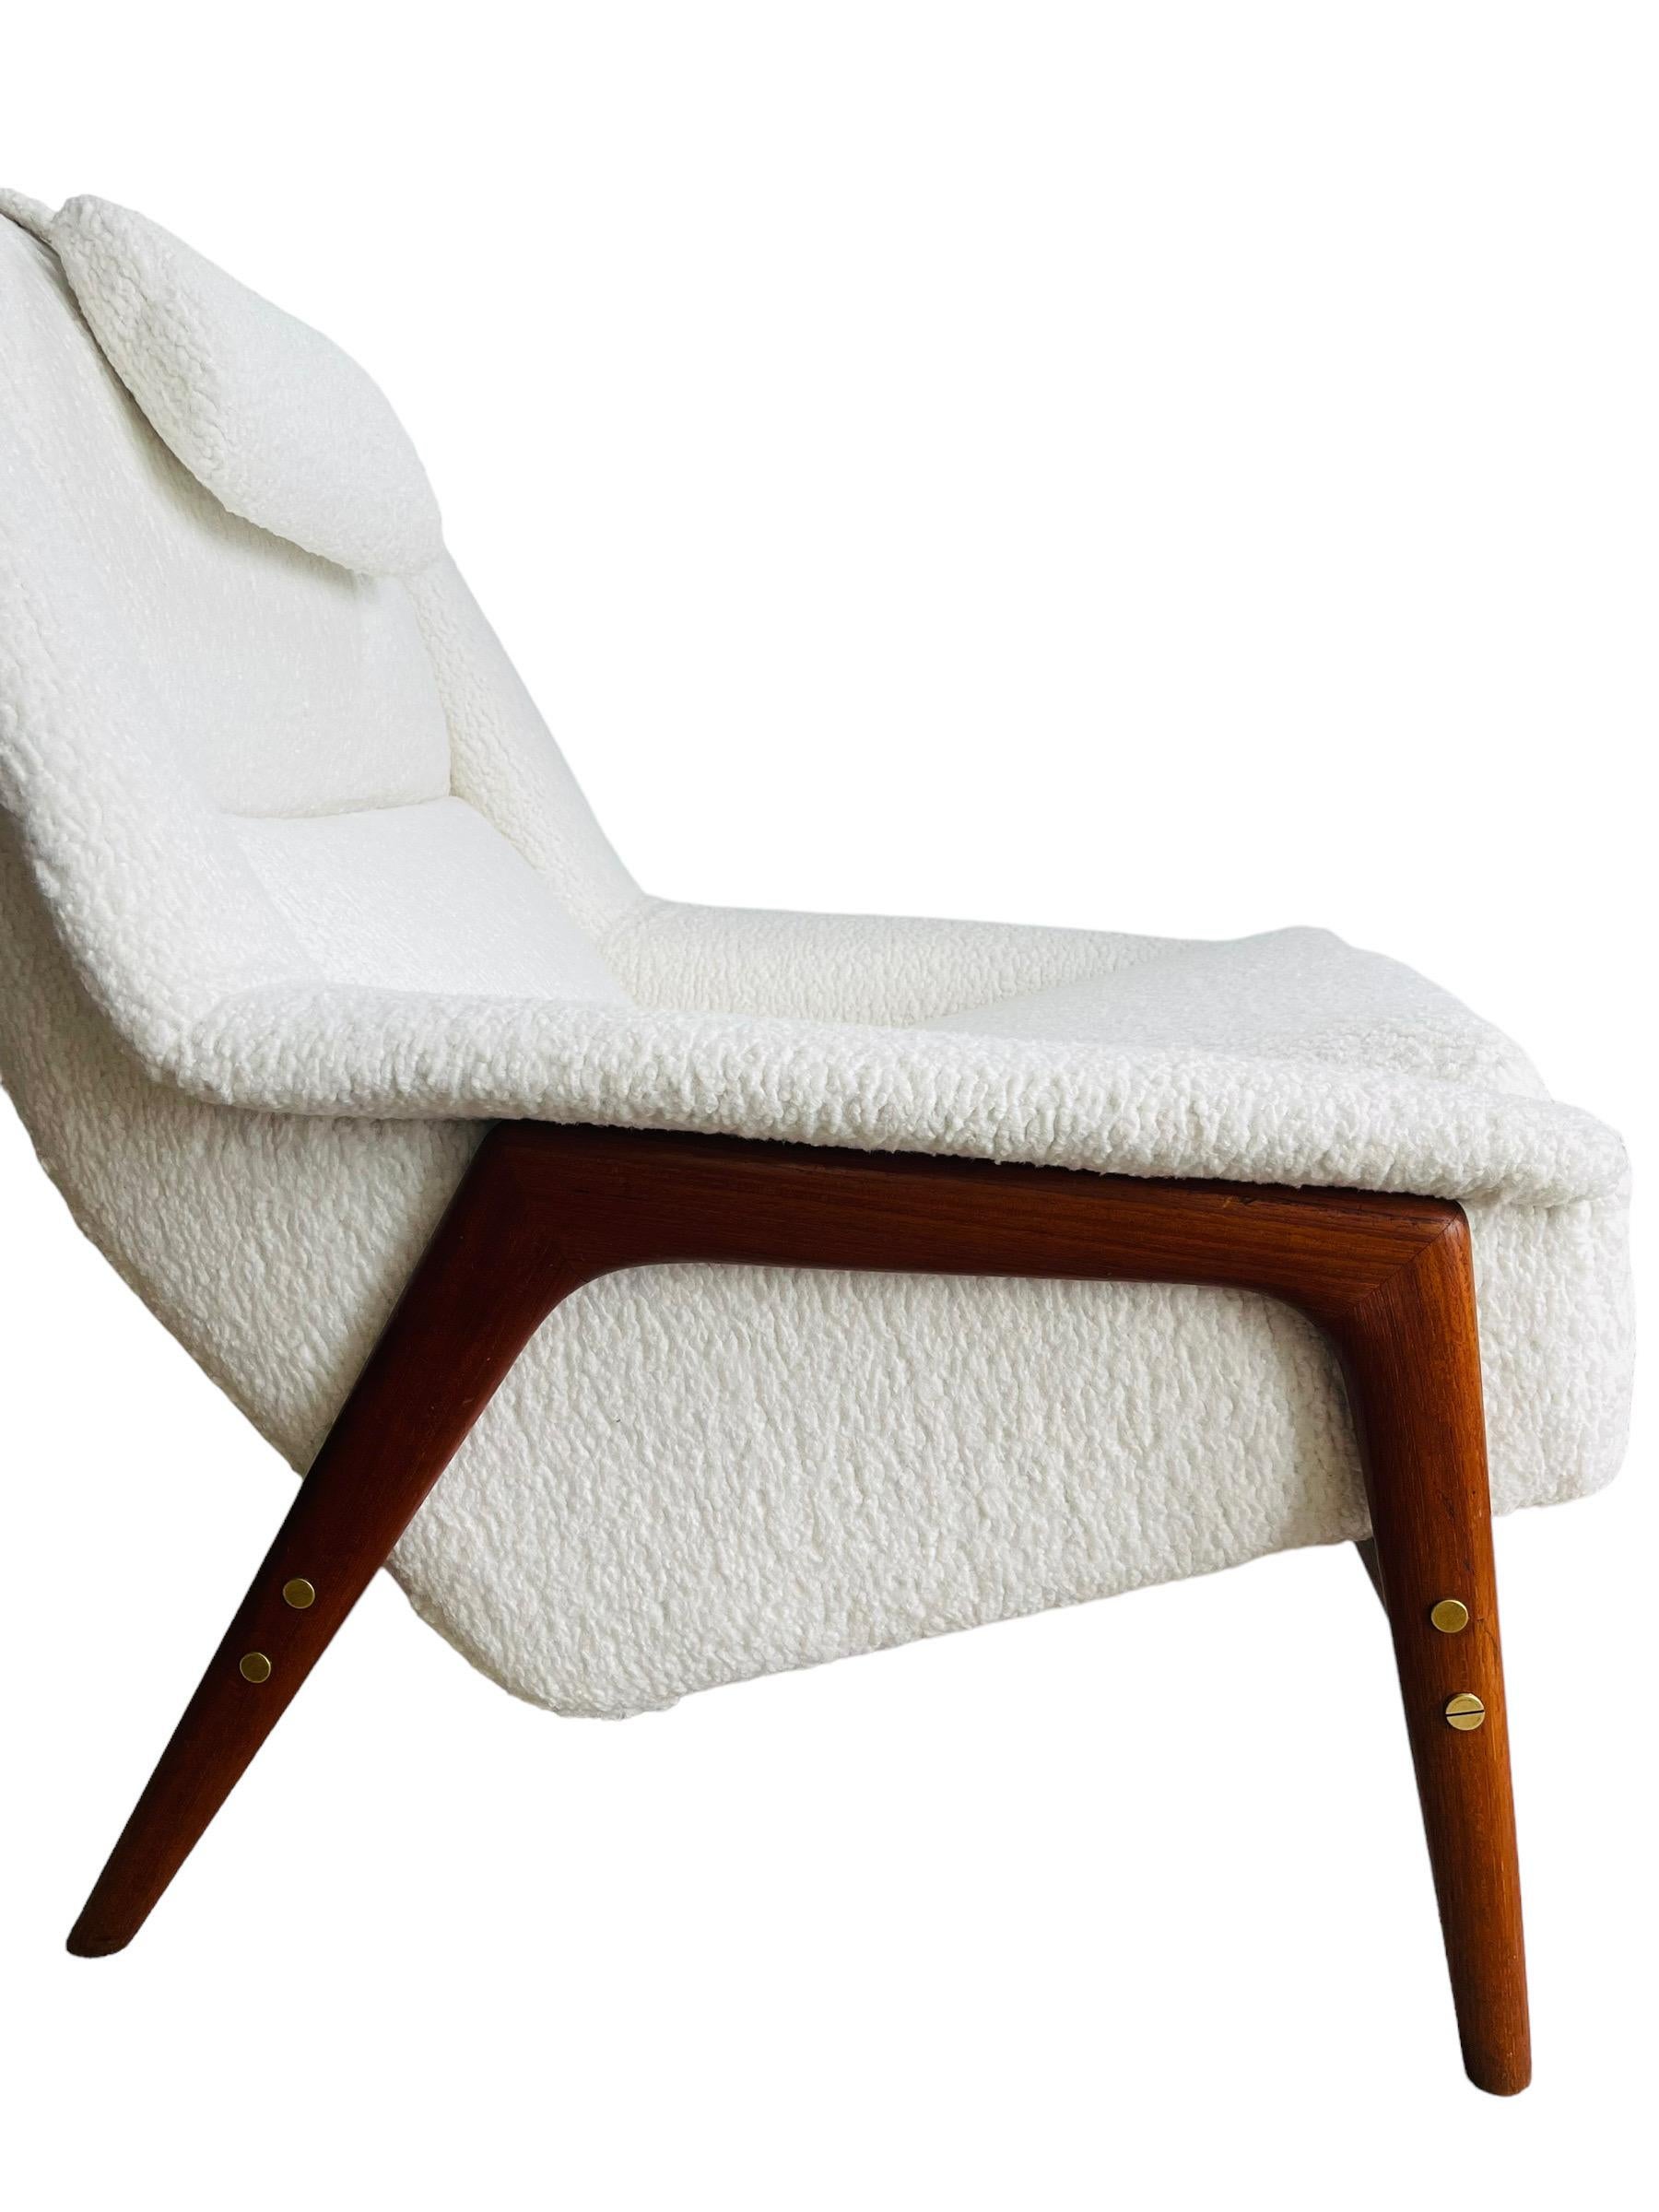 20th Century Folke Ohlsson Lounge Chair for Dux